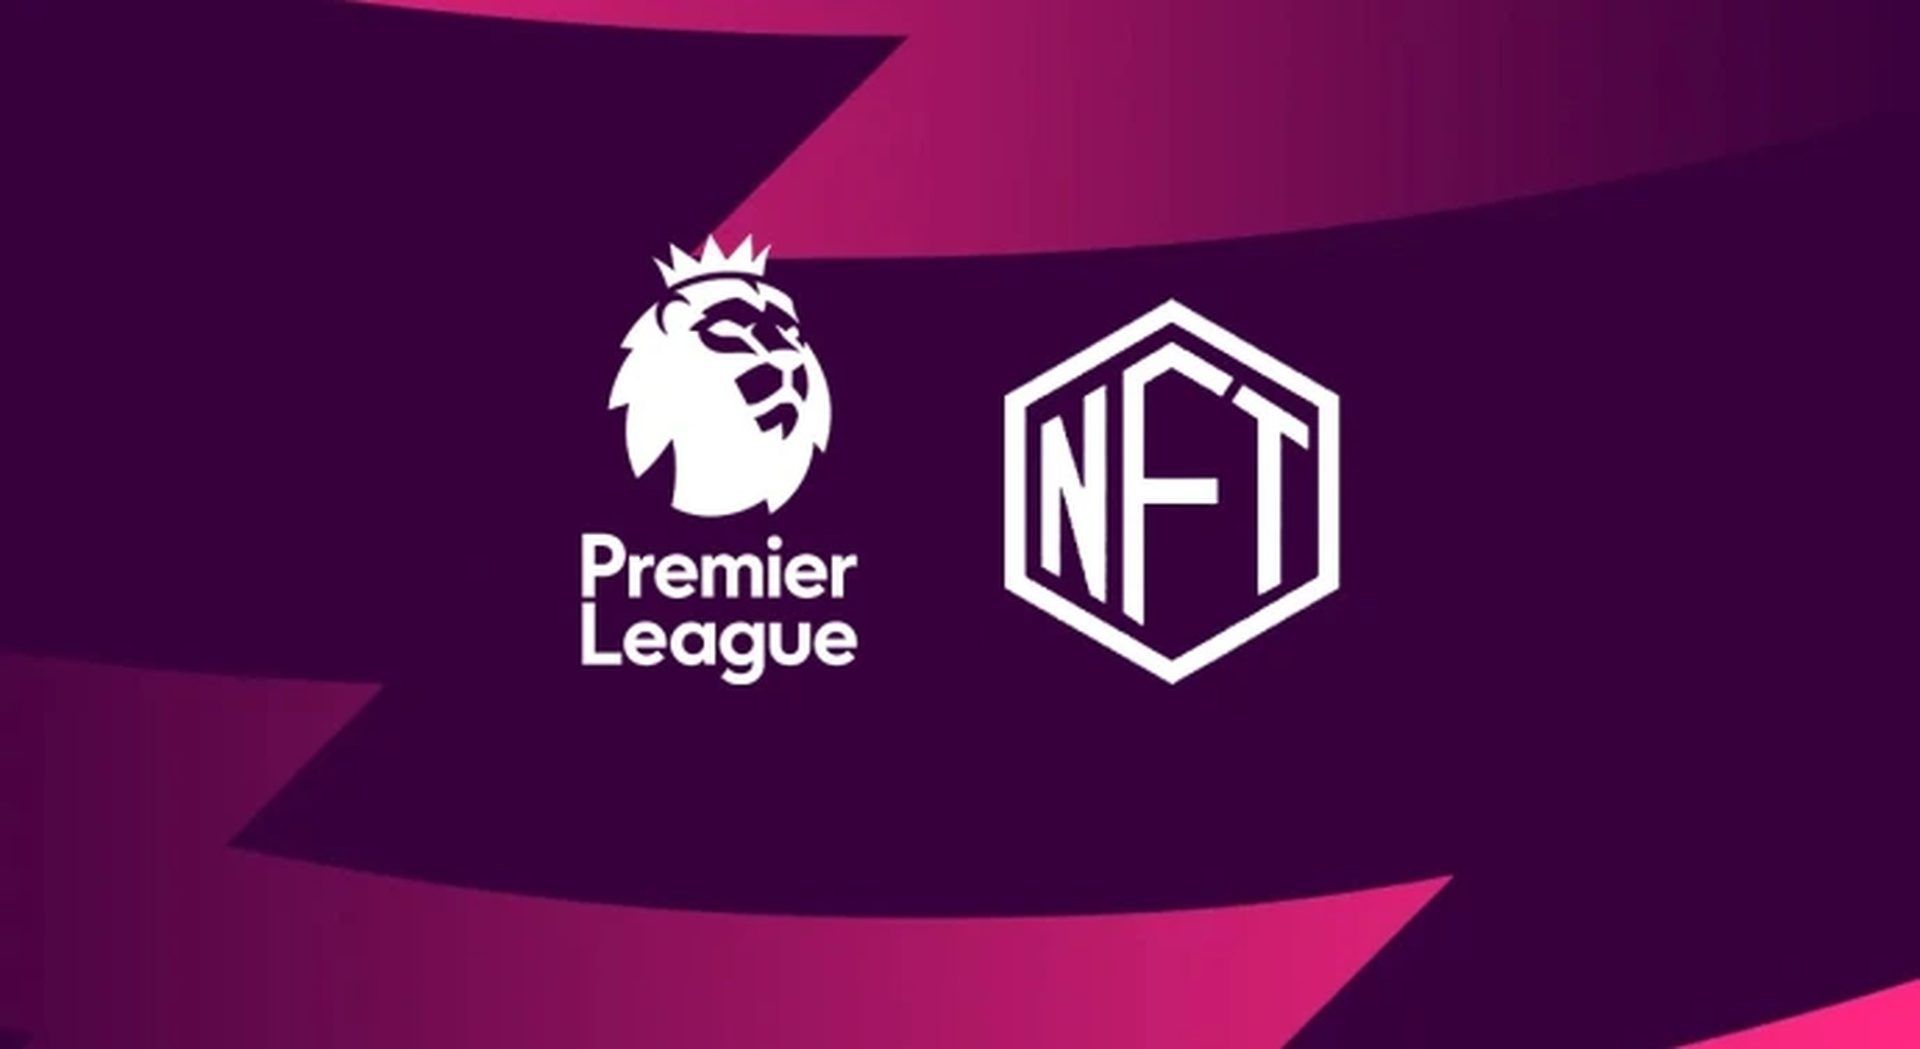 Premier League NFTs are on the way with Sorare